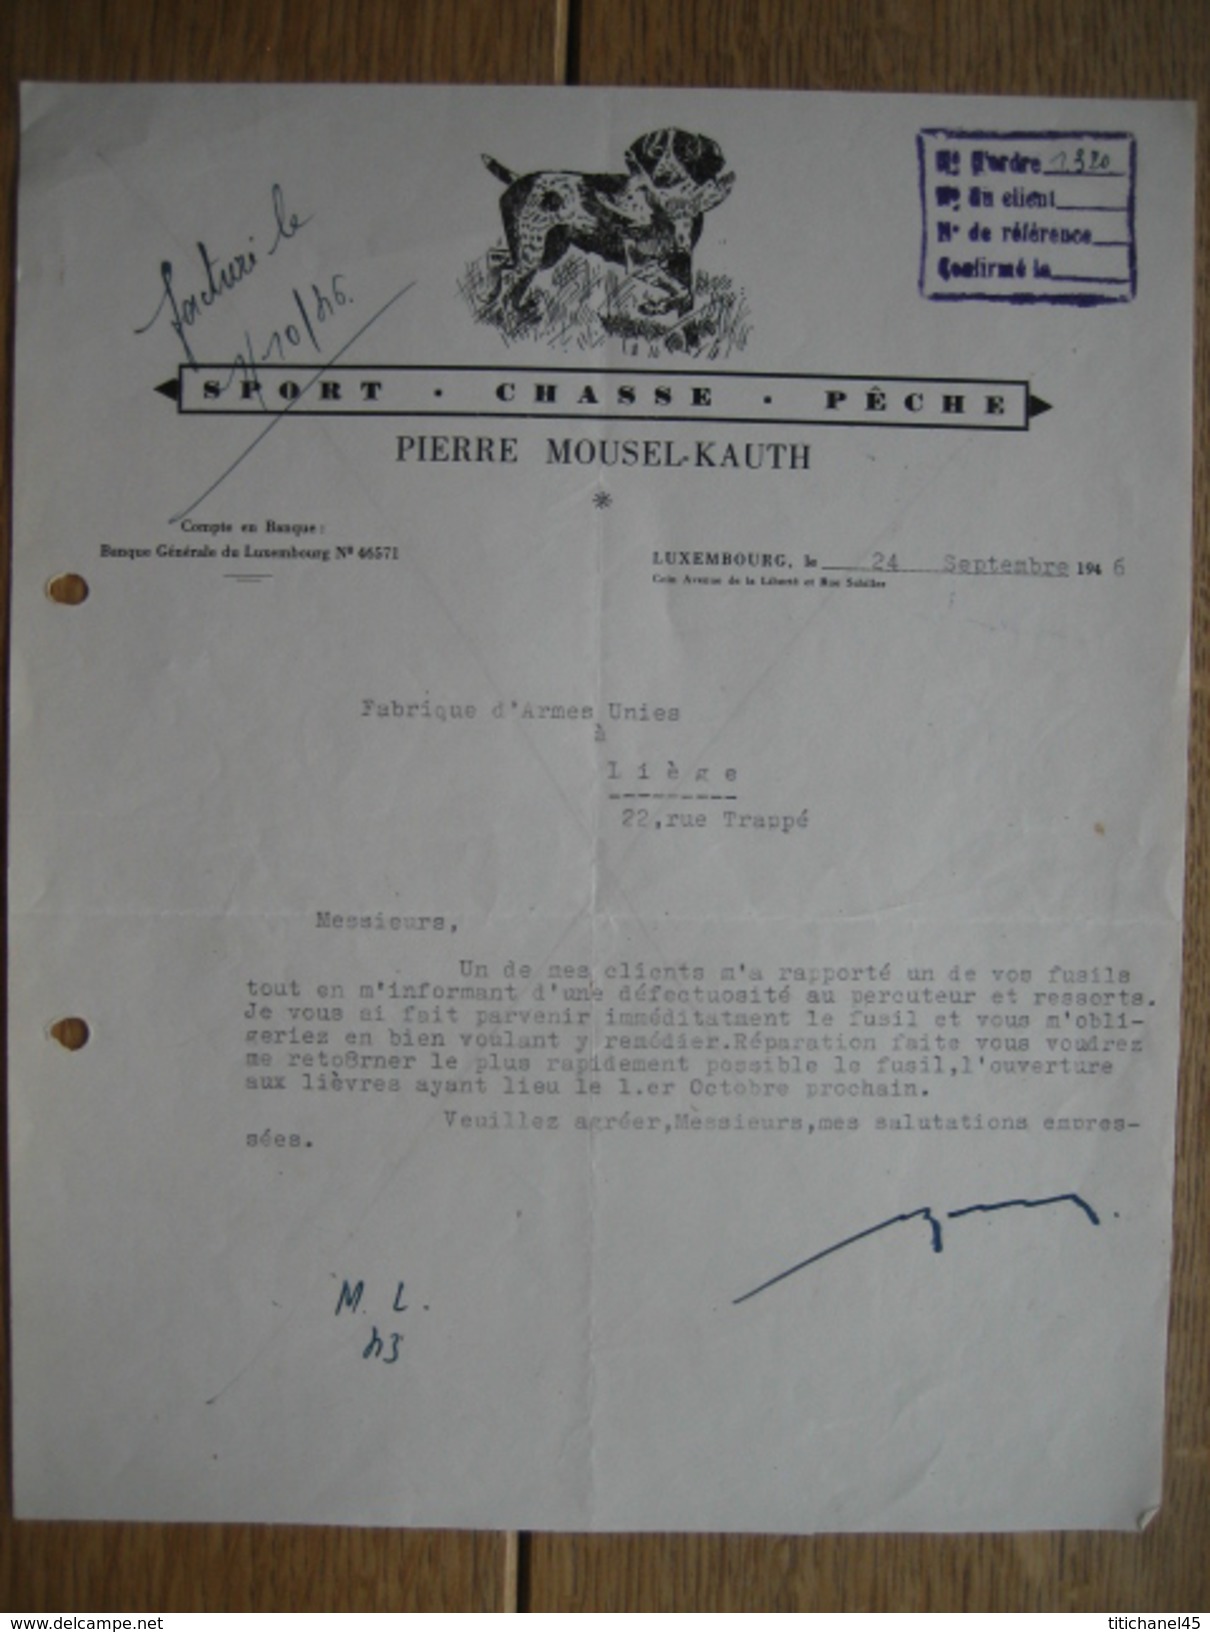 LUXEMBOURG 1946 - PIERRE MOUSEL-KAUTH - Sport - Chasse - Pêche - Luxembourg